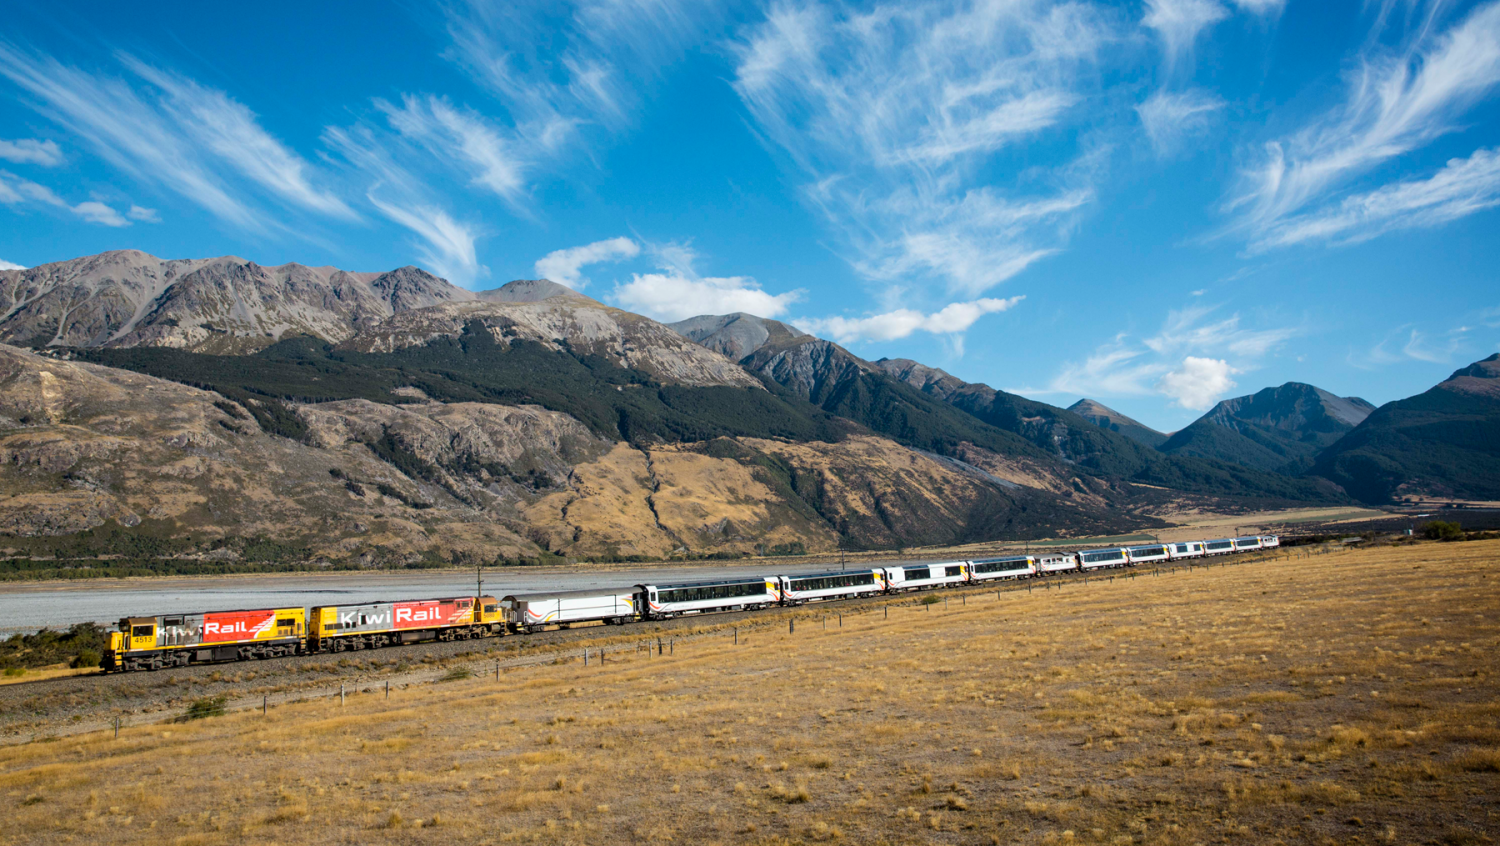 Image 1 for Experience New Zealand by Rail, Cruise and Coach